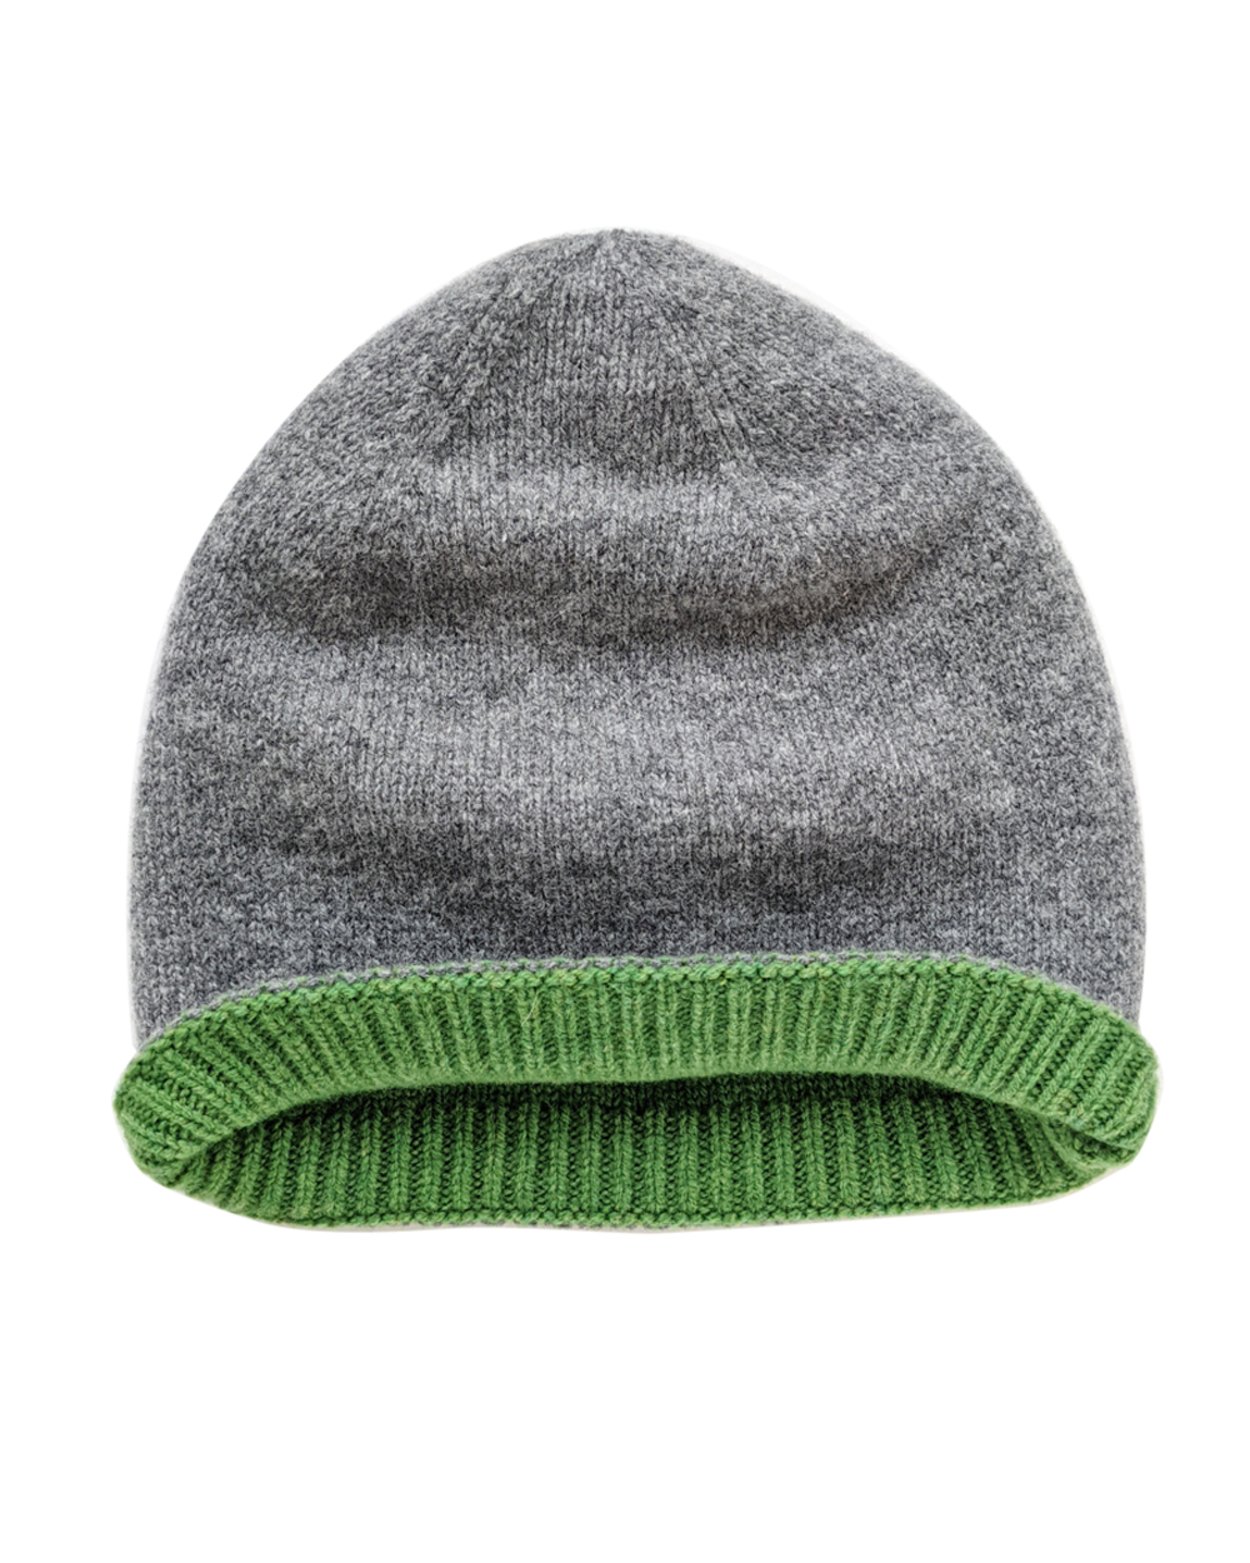 Lambswool Double Sided Hat in Grey & Green